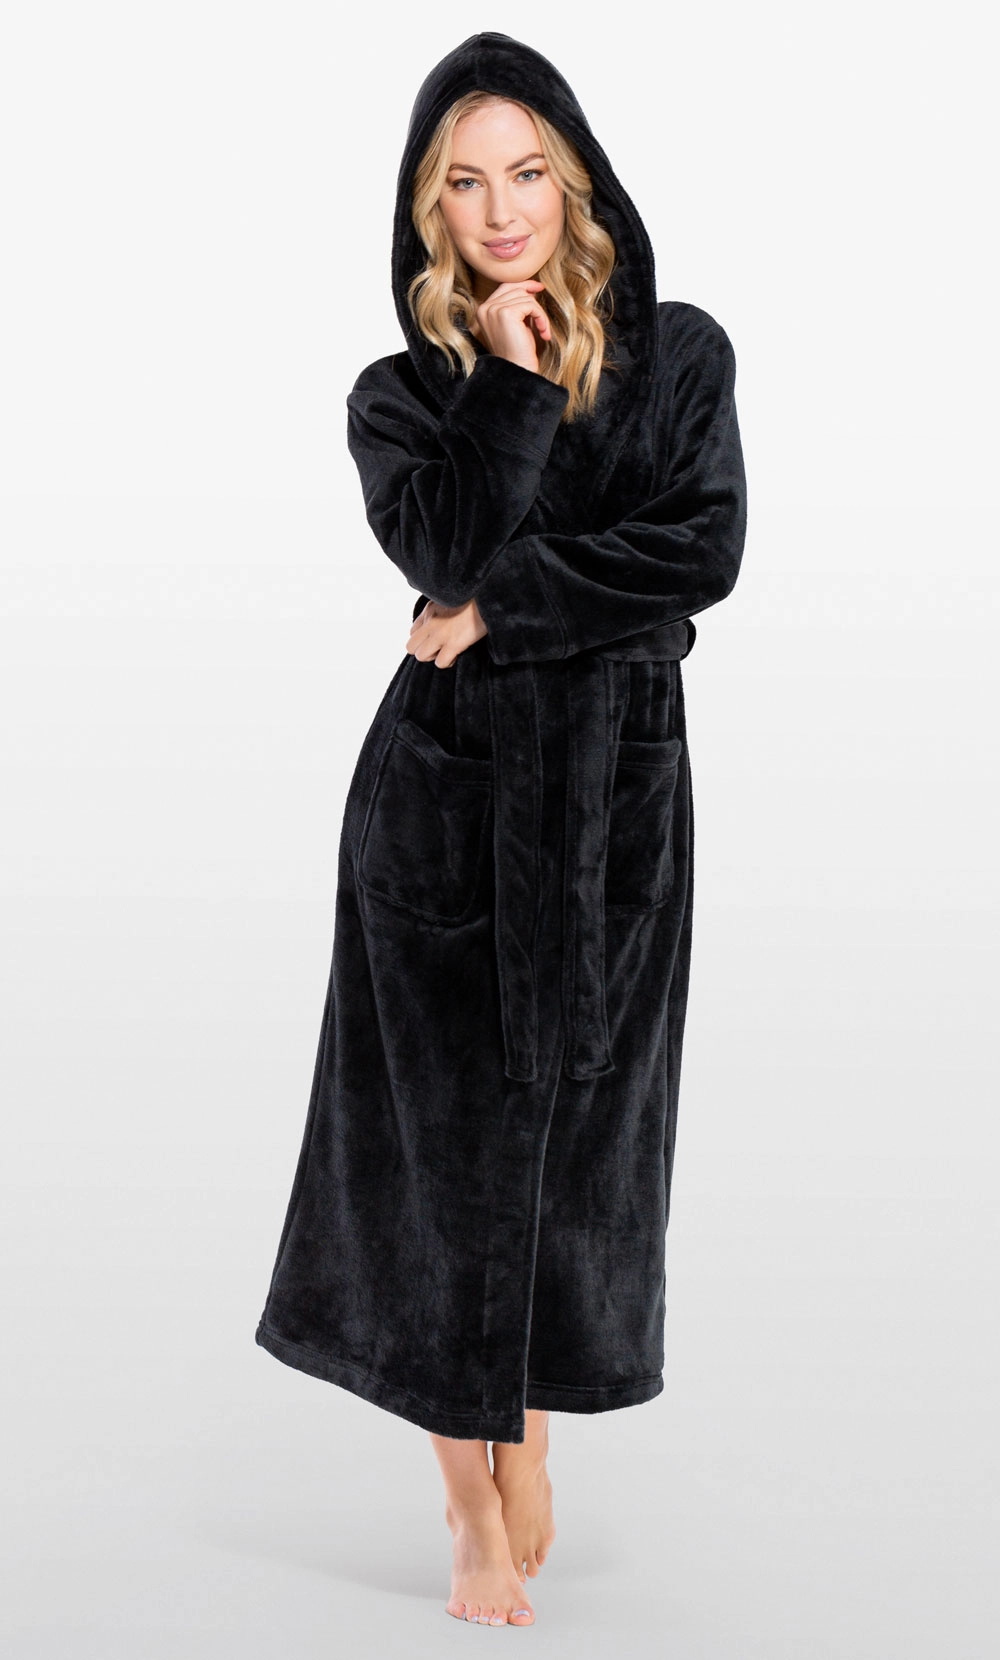 Stay Cozy with These Stylish Robes